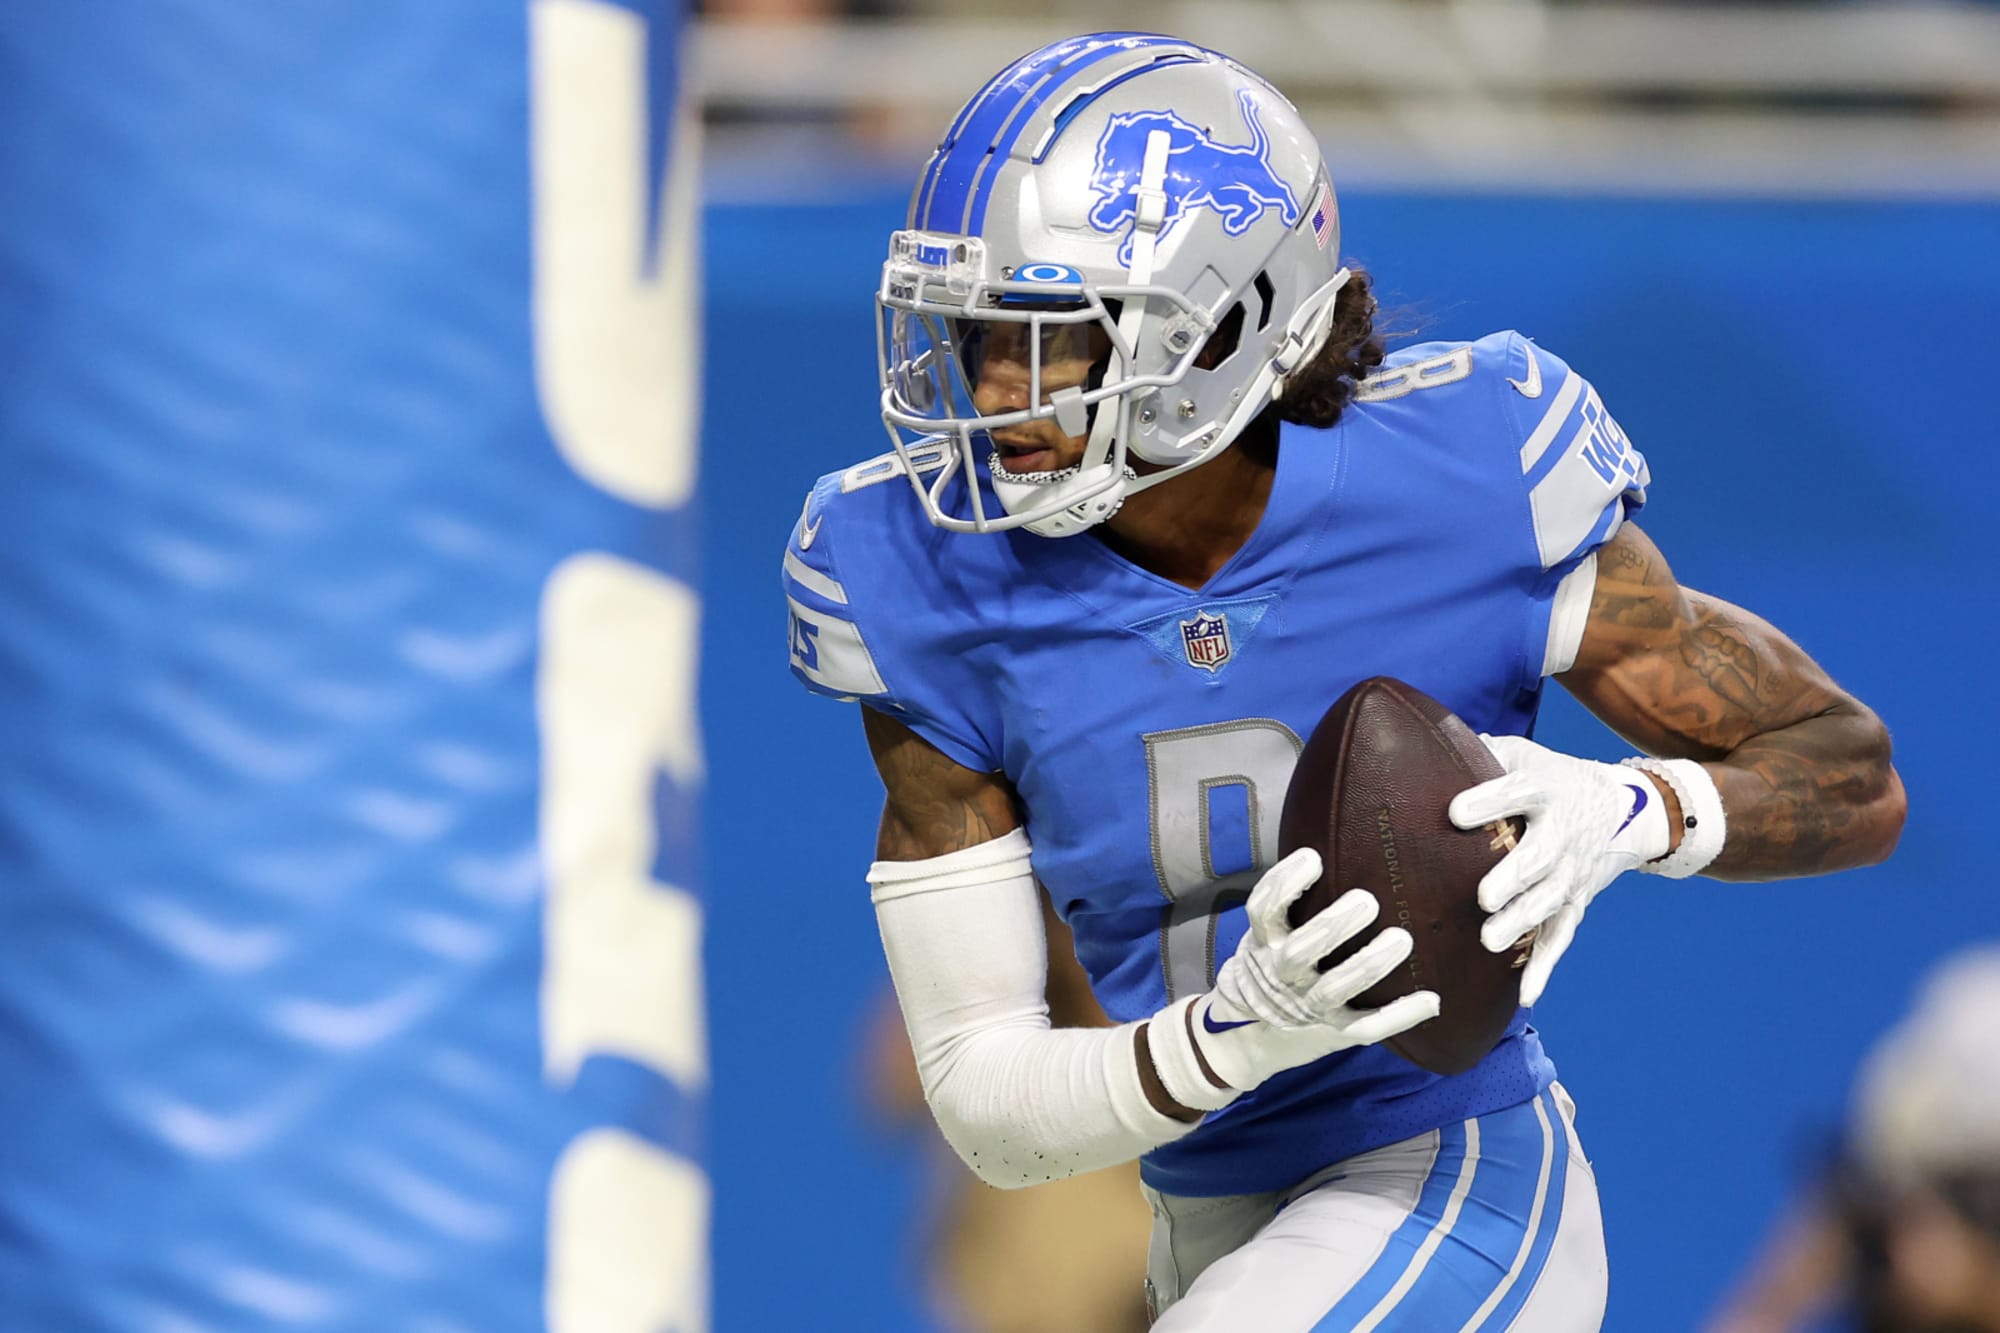 Lions wide receiver Josh Reynolds starting to have the look of a Week 4 fantasy sleeper